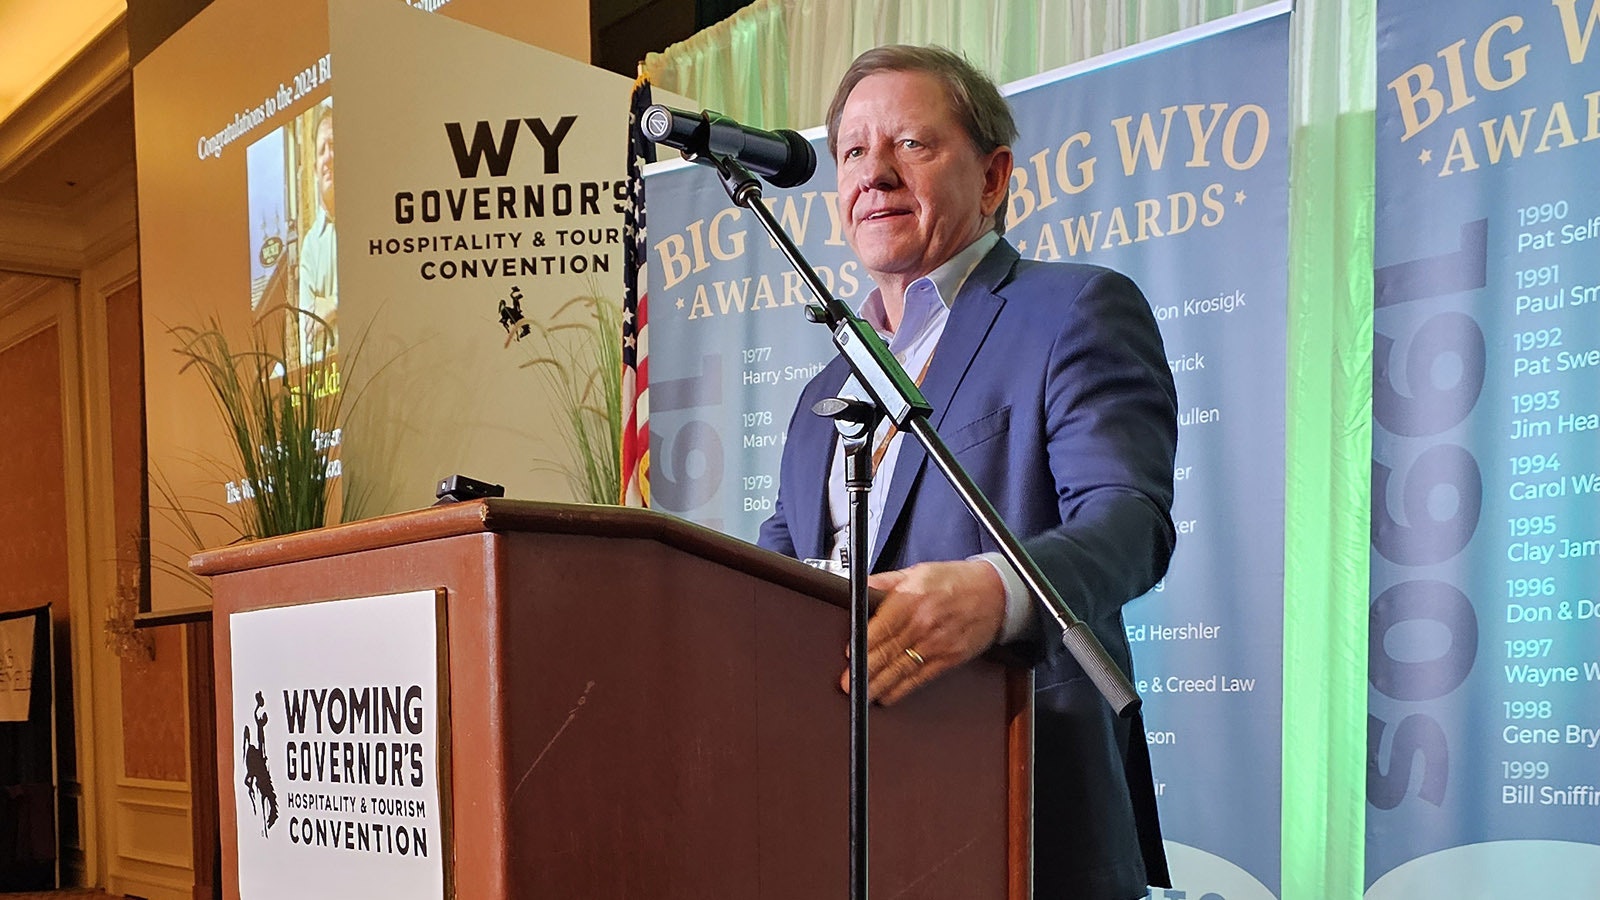 Jim Waldrop is almost speechless for a few moments at the podium after winning the 2024 BIG WYO Award.